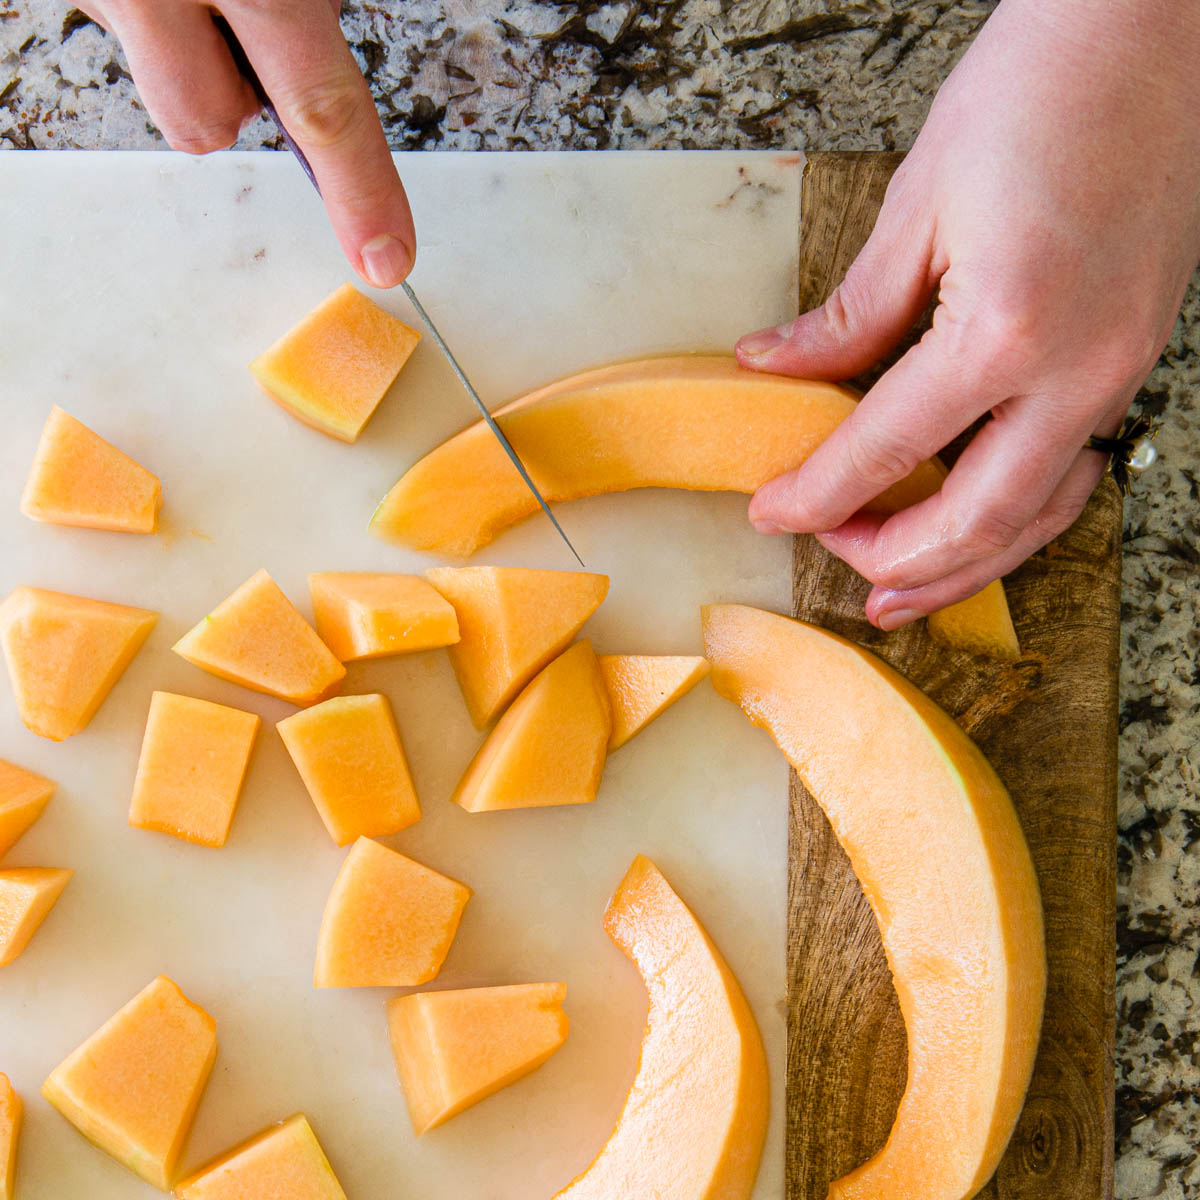 slicing small pieces of cantaloupe from large wedges on a marble cutting board.